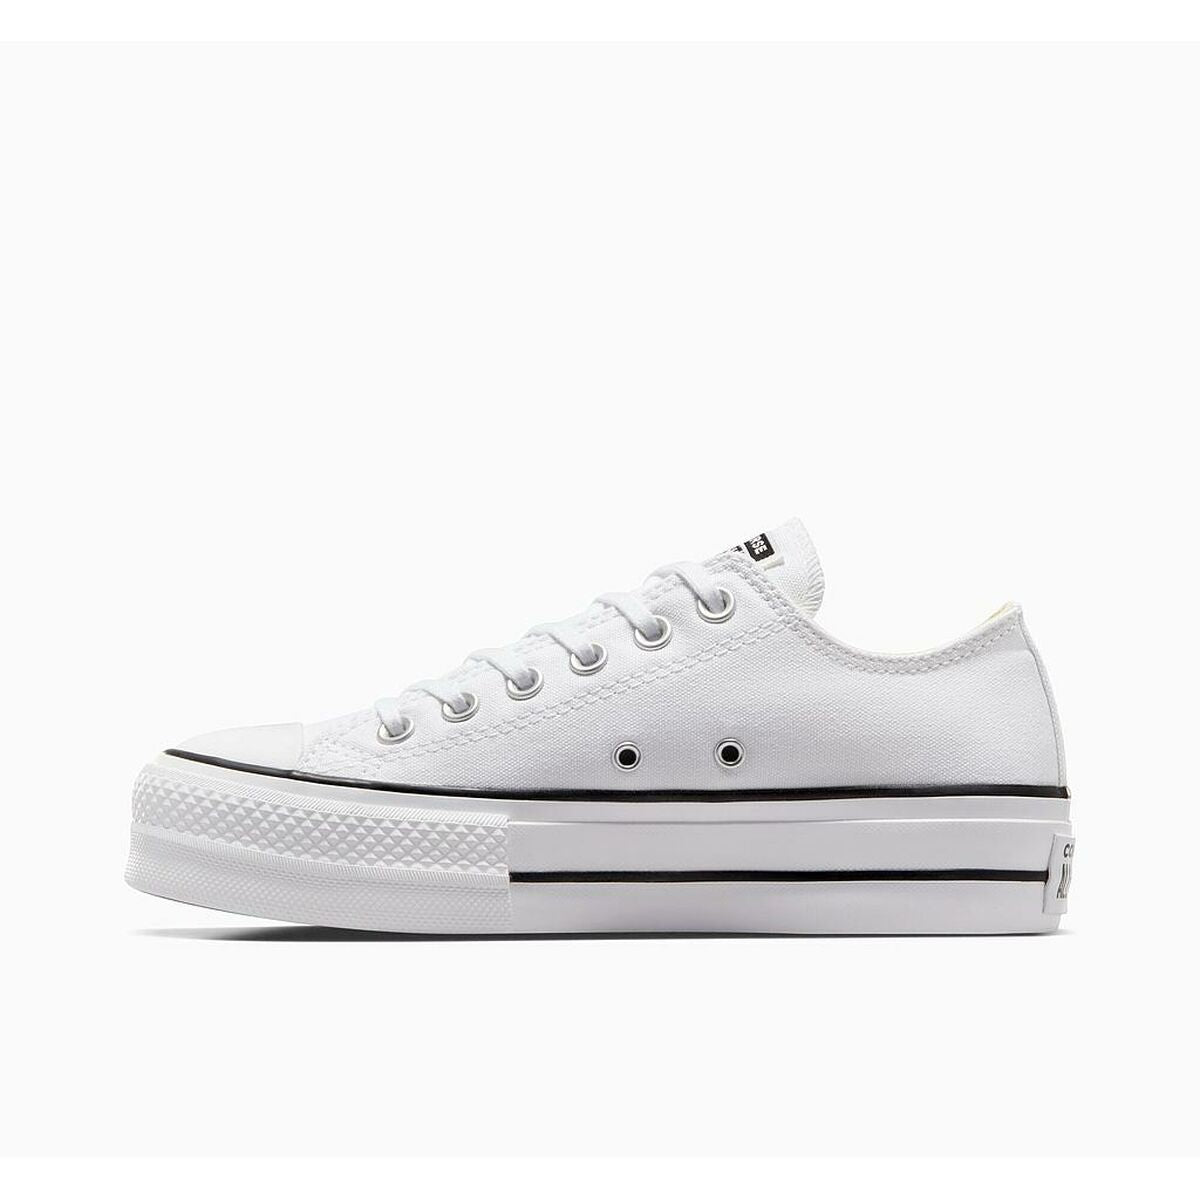 Sports Trainers for Women Converse White